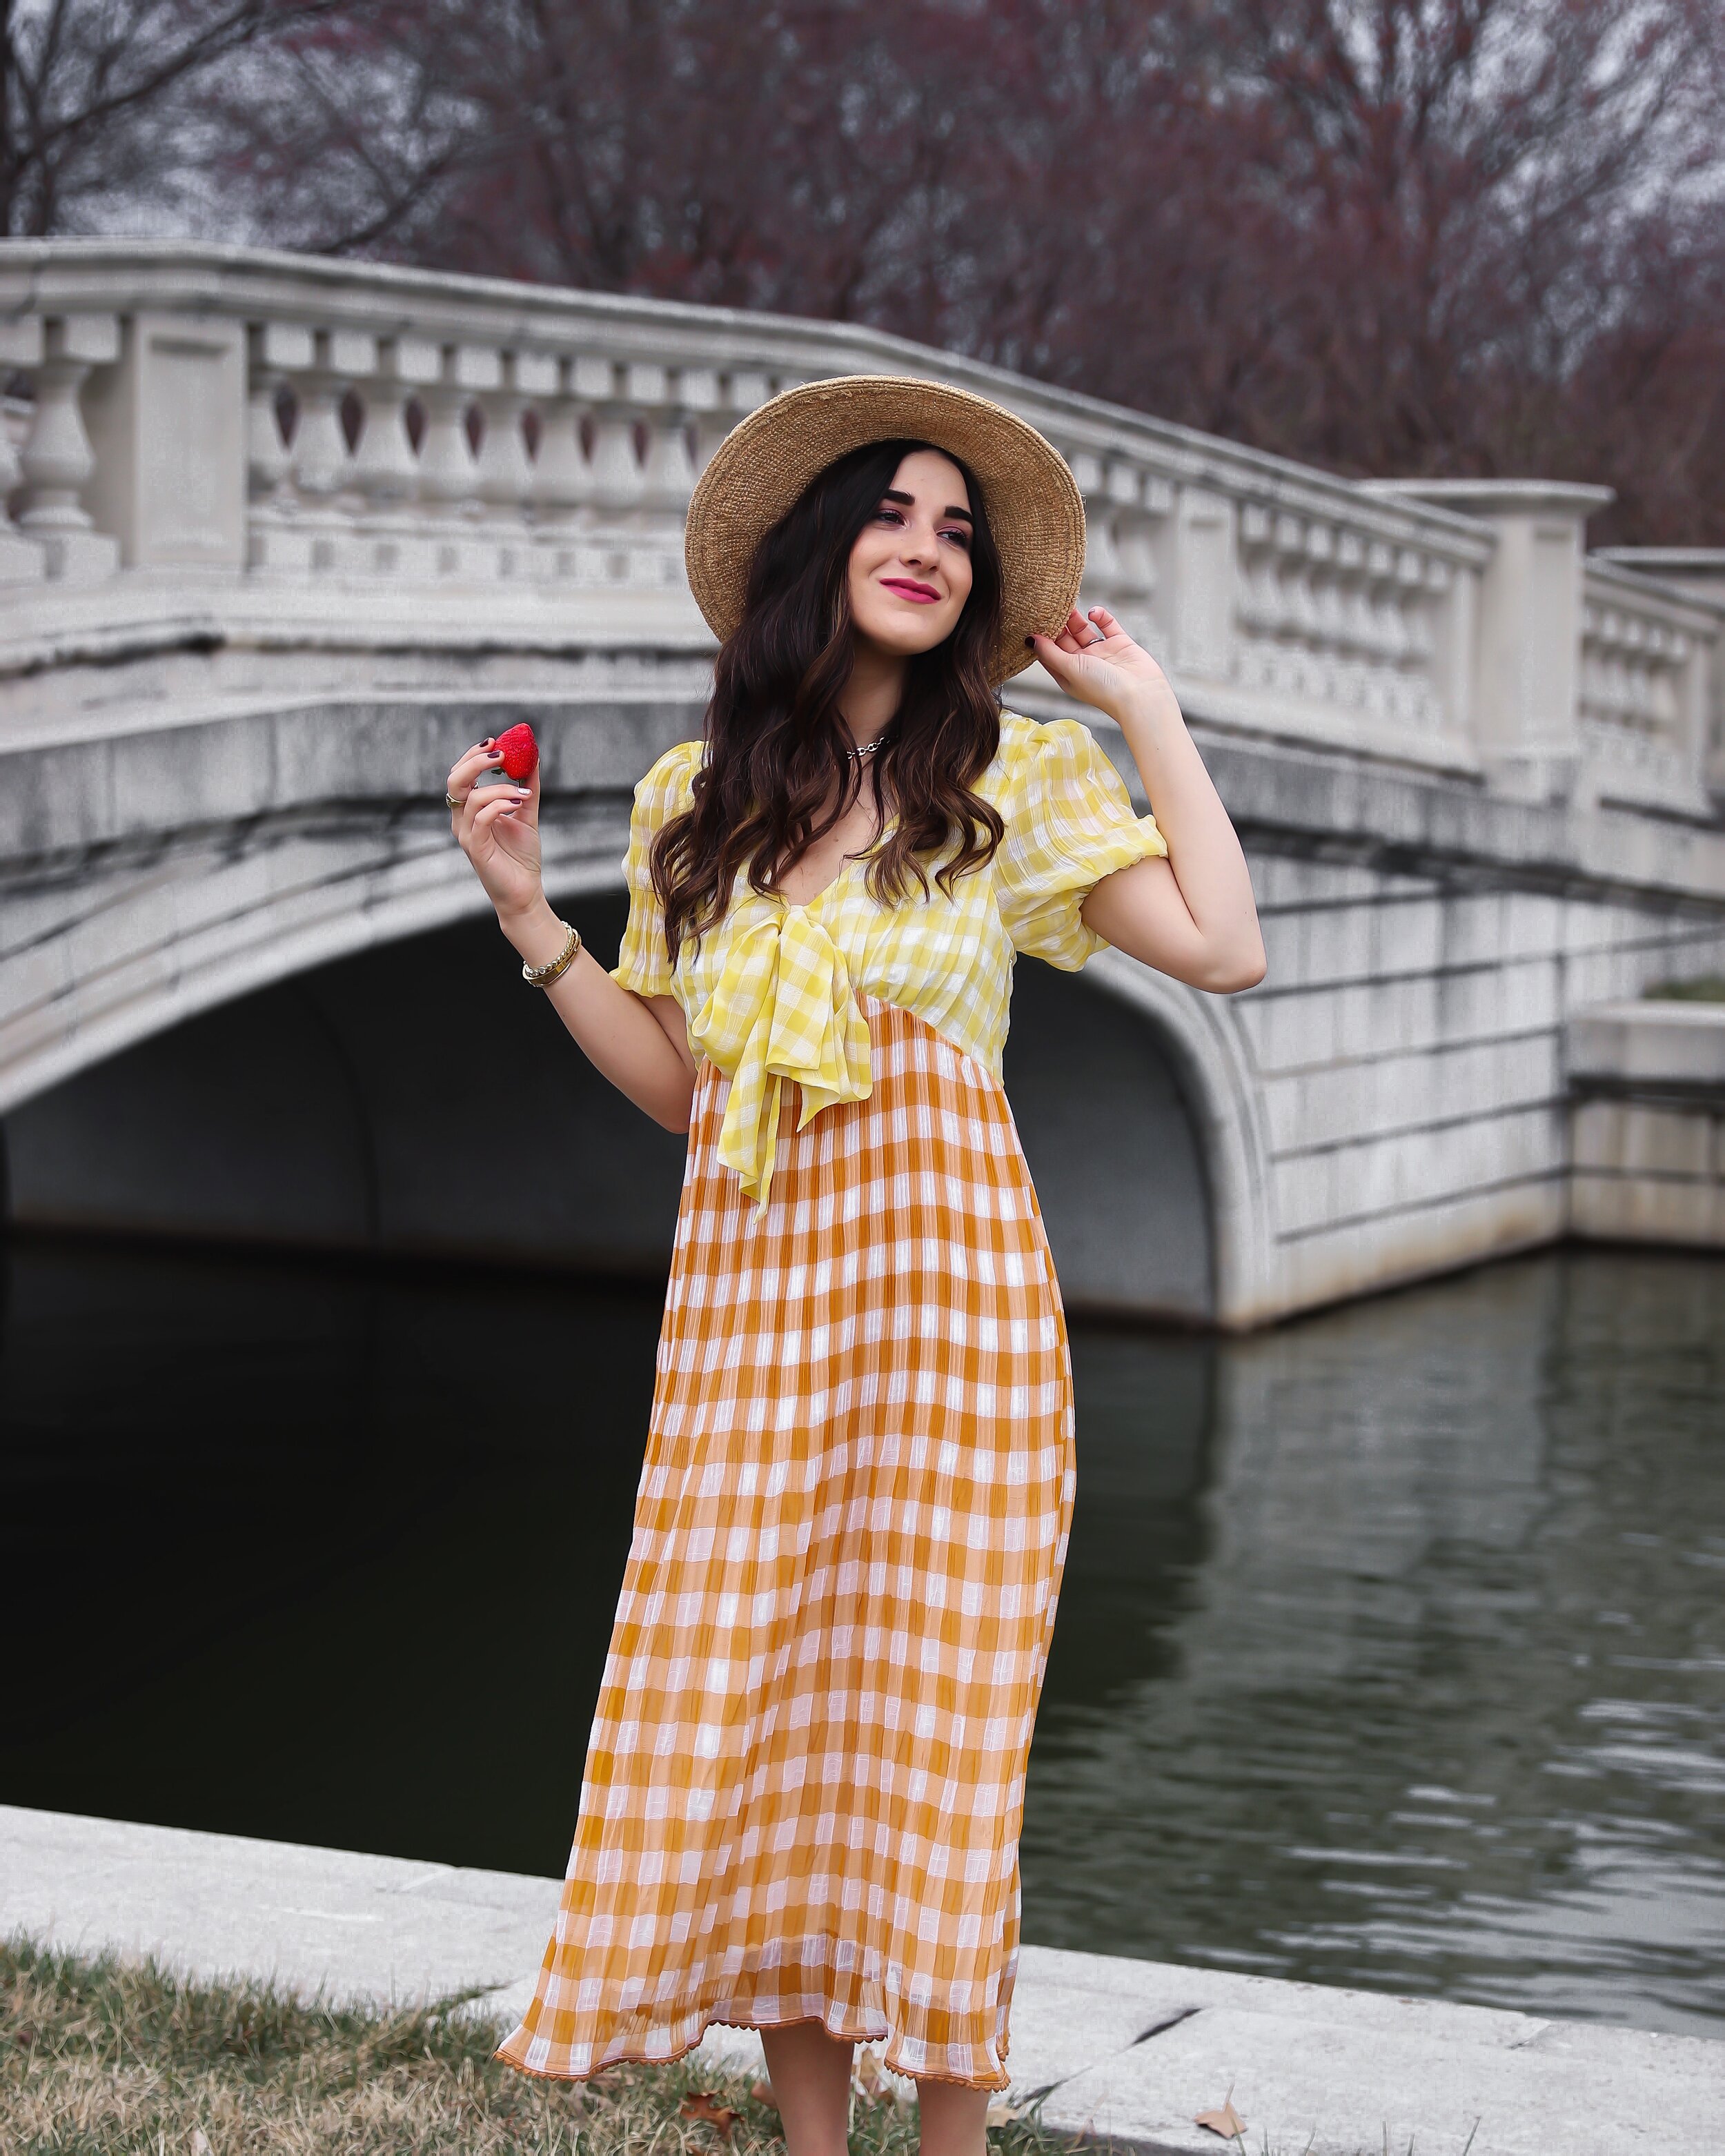 Gingham Midi Dress Summer Picnic Esther Santer NYC Street Style Fashion Blogger Fedora Checkered Maxi Orange Yellow Colorful Spring Stawberries Photoshoot St Louis Missouri Foxiedox Noa Initital Necklace Gold Bracelets Rings Jewelry Forest Park  Hat.JPG